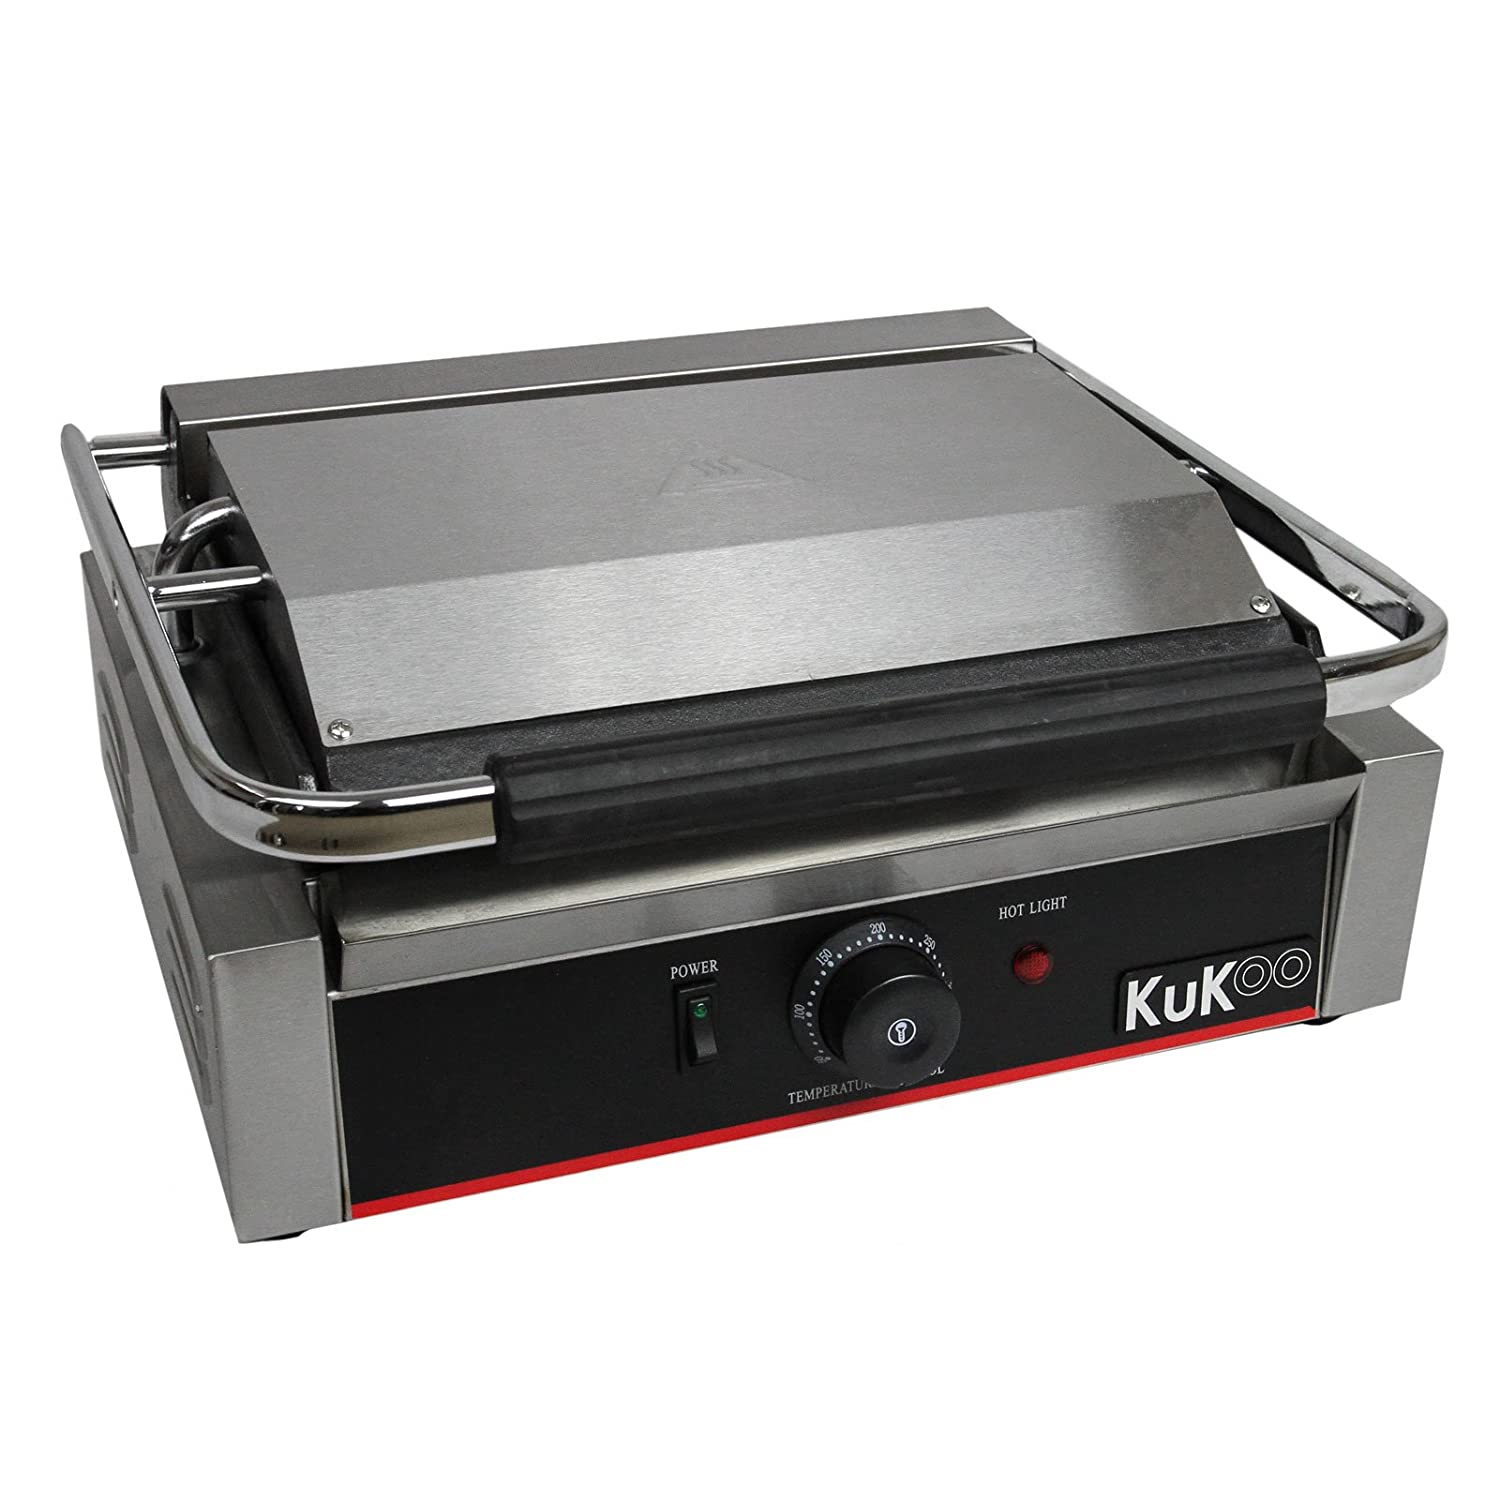 KuKoo Stainless Steel Panini Sandwich Toaster Electric Grill Barbecue Table Grill 1/2 Straight 1/2 Corrugated, 2200 W with Free Wire Brush and 2 x Grease Drip Trays 43 cm W x 31 cm (D) x 21.5 cm (H)